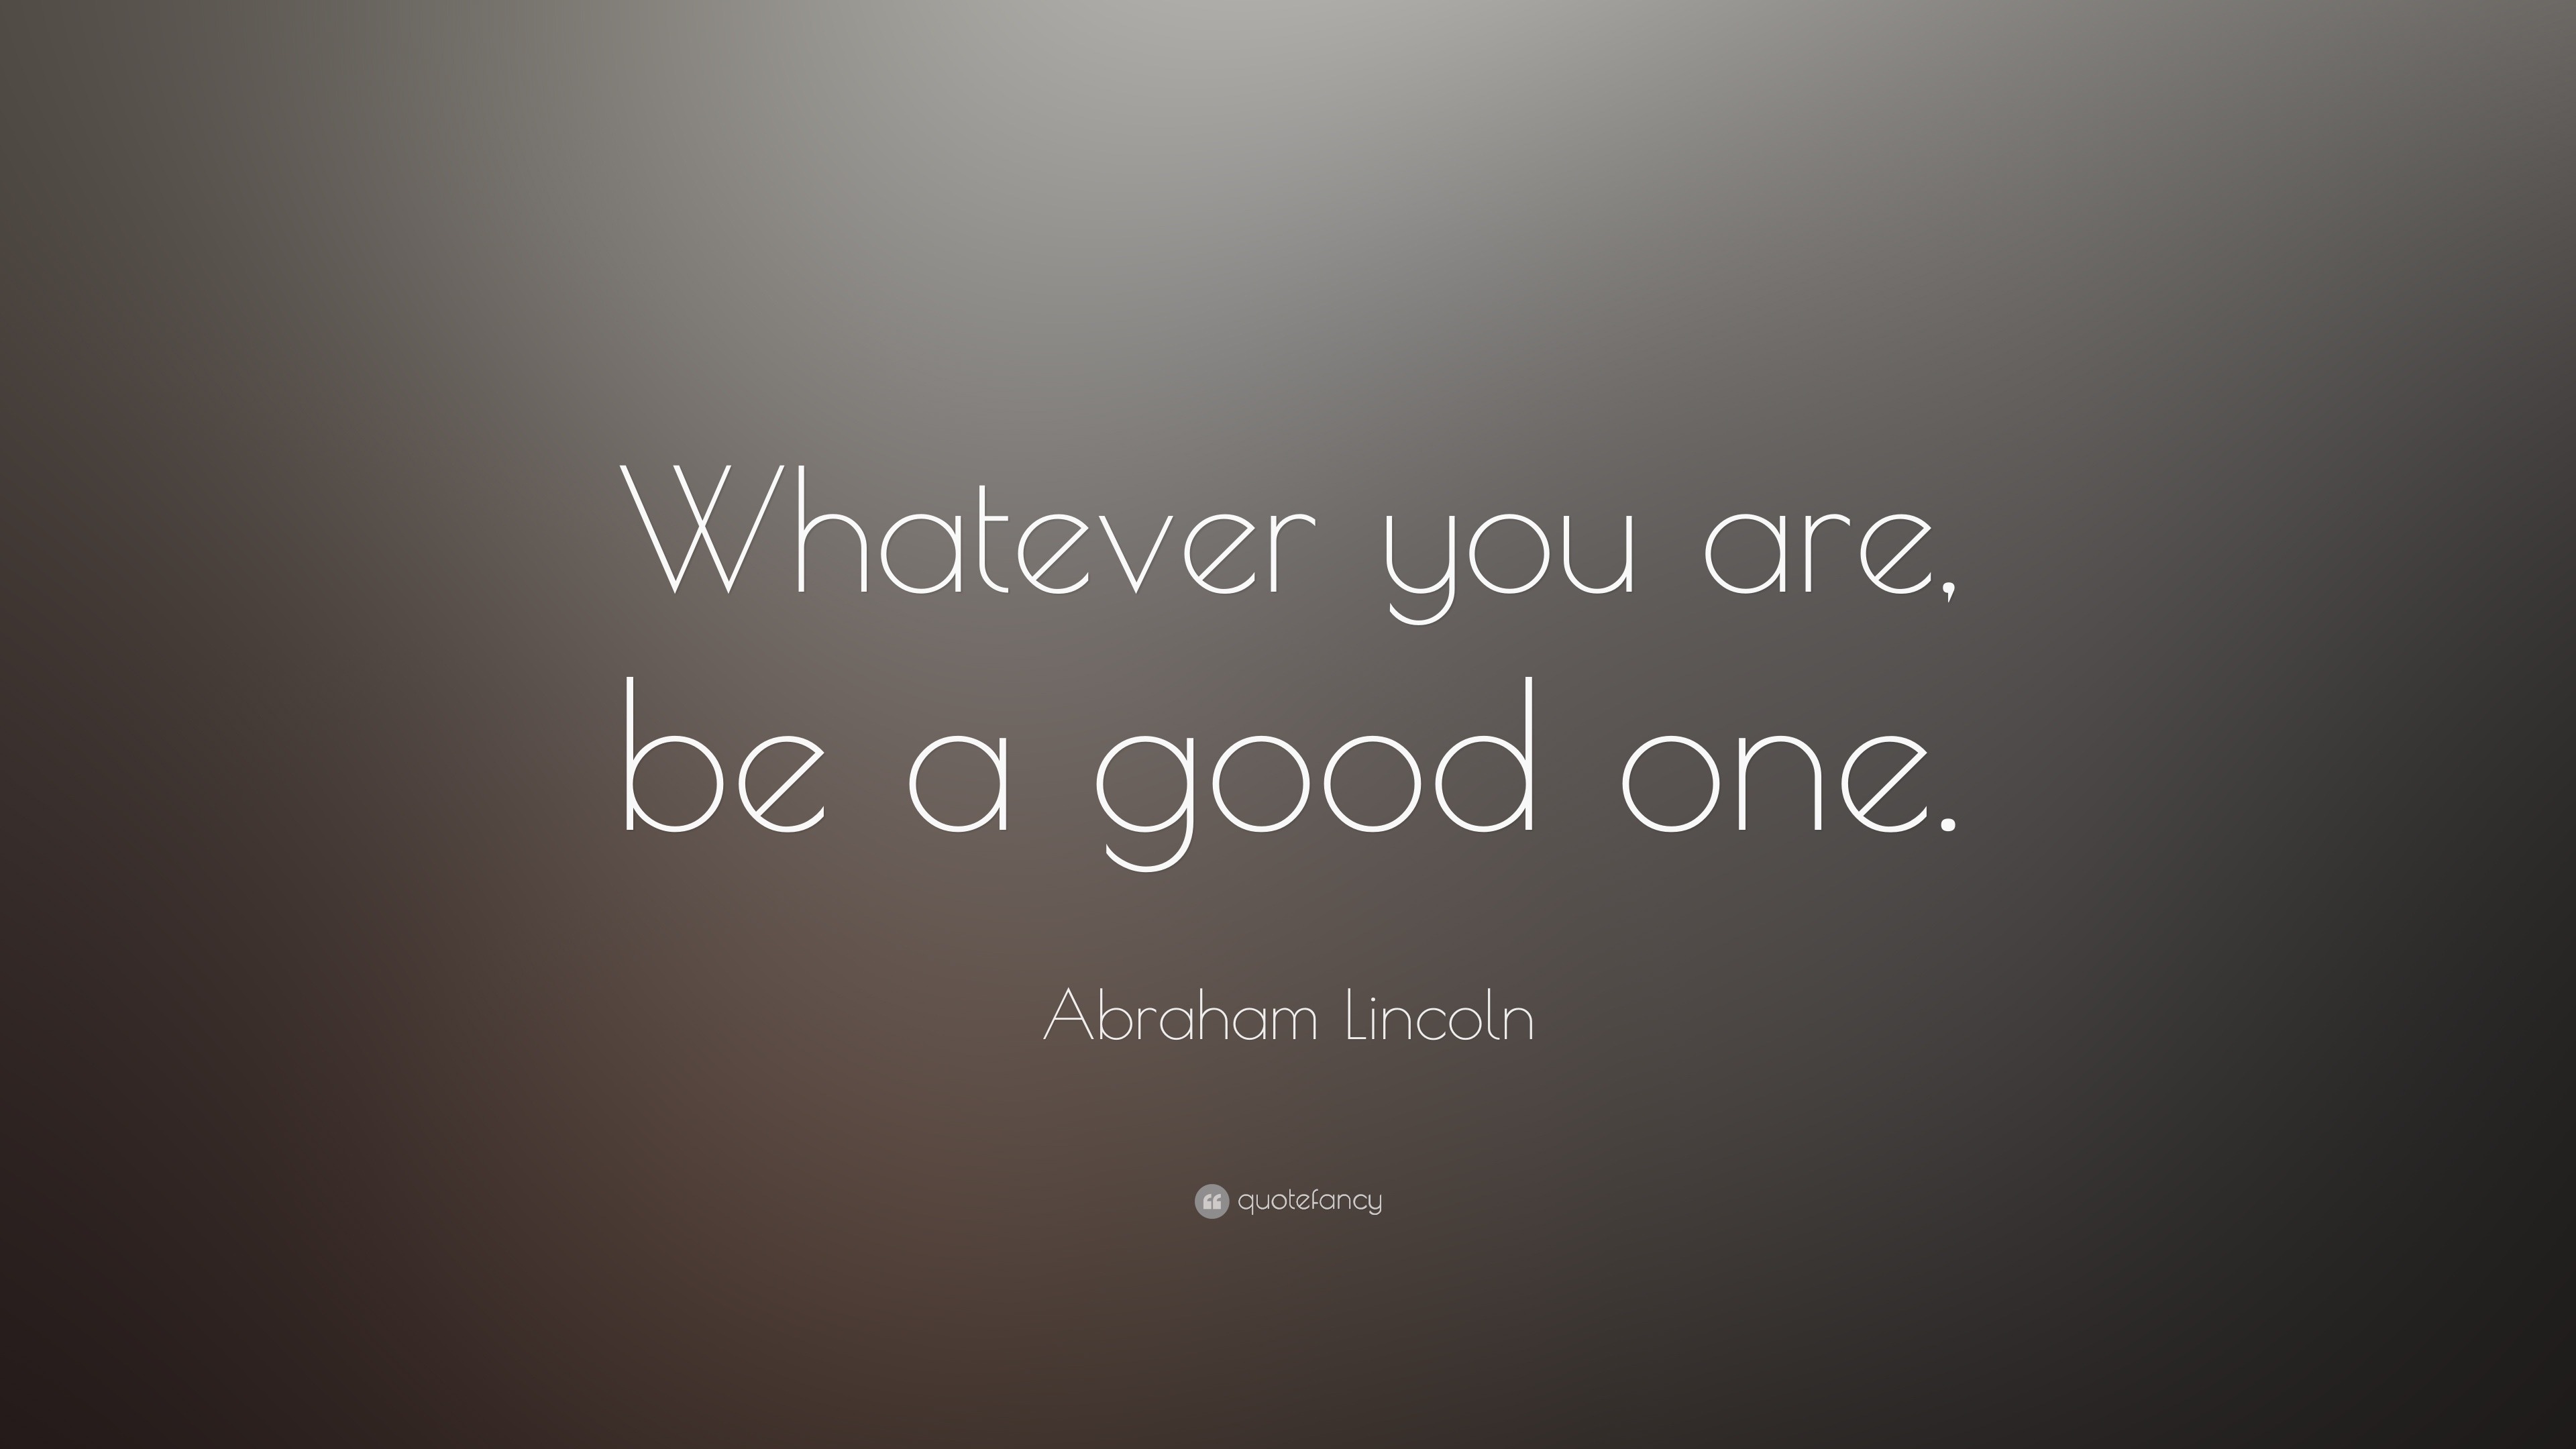 Abraham Lincoln Quote: “Whatever you are, be a good one.” (23 ...